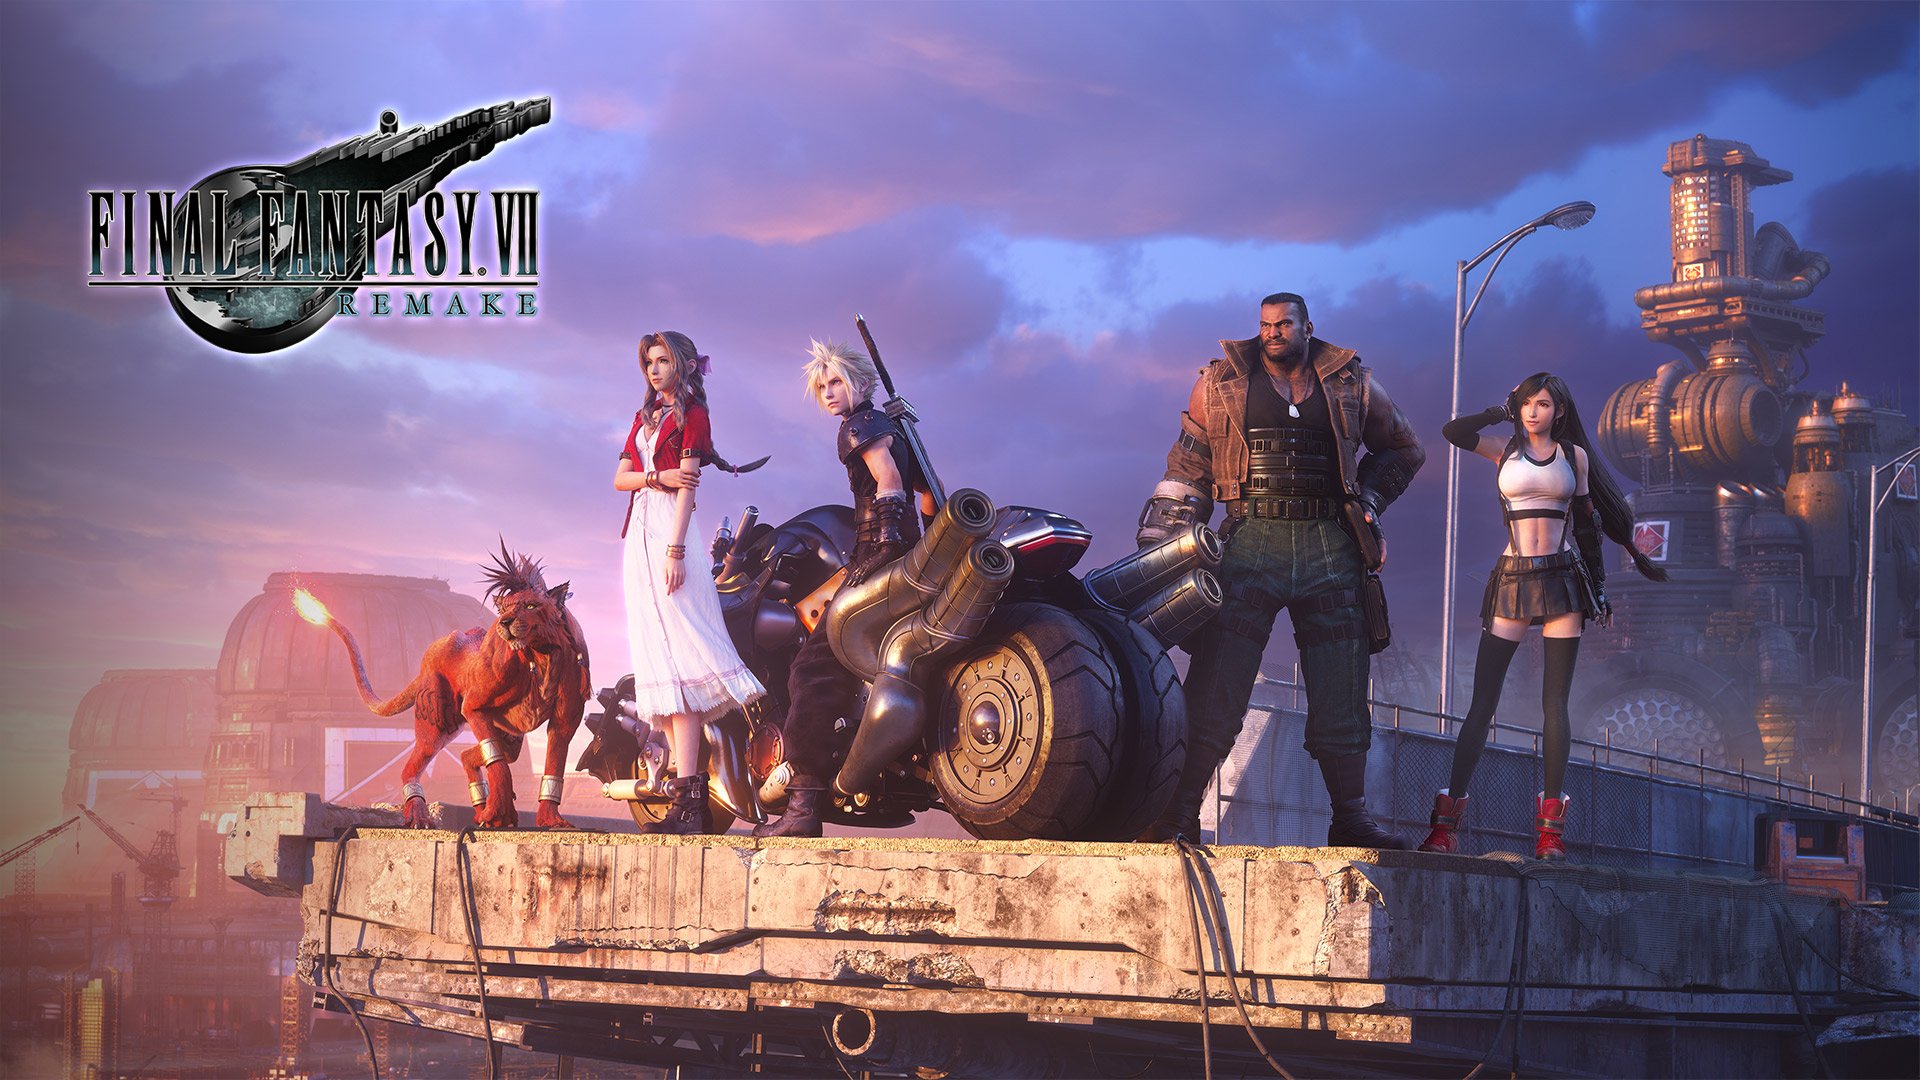 Final Fantasy VII Remake comes 23 years after the original game. (Picture: Sony/Square Enix)